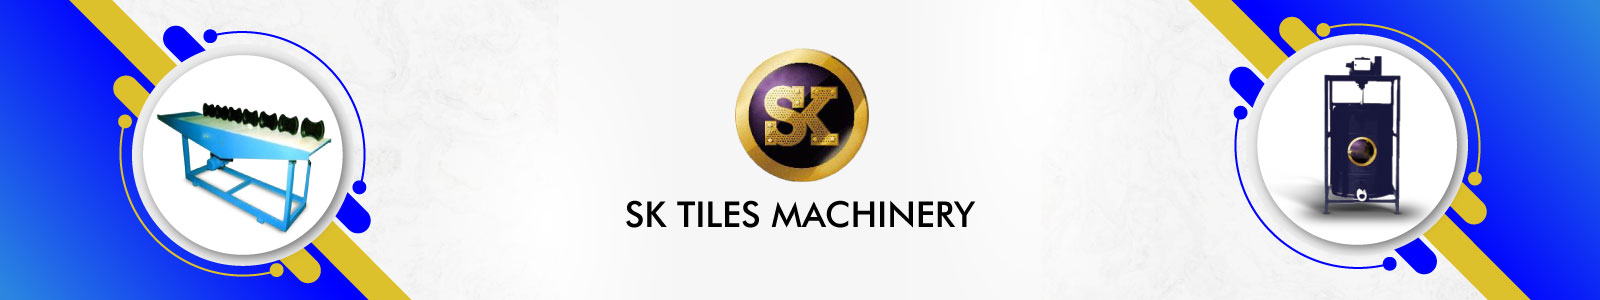 SK TILES MACHINERY